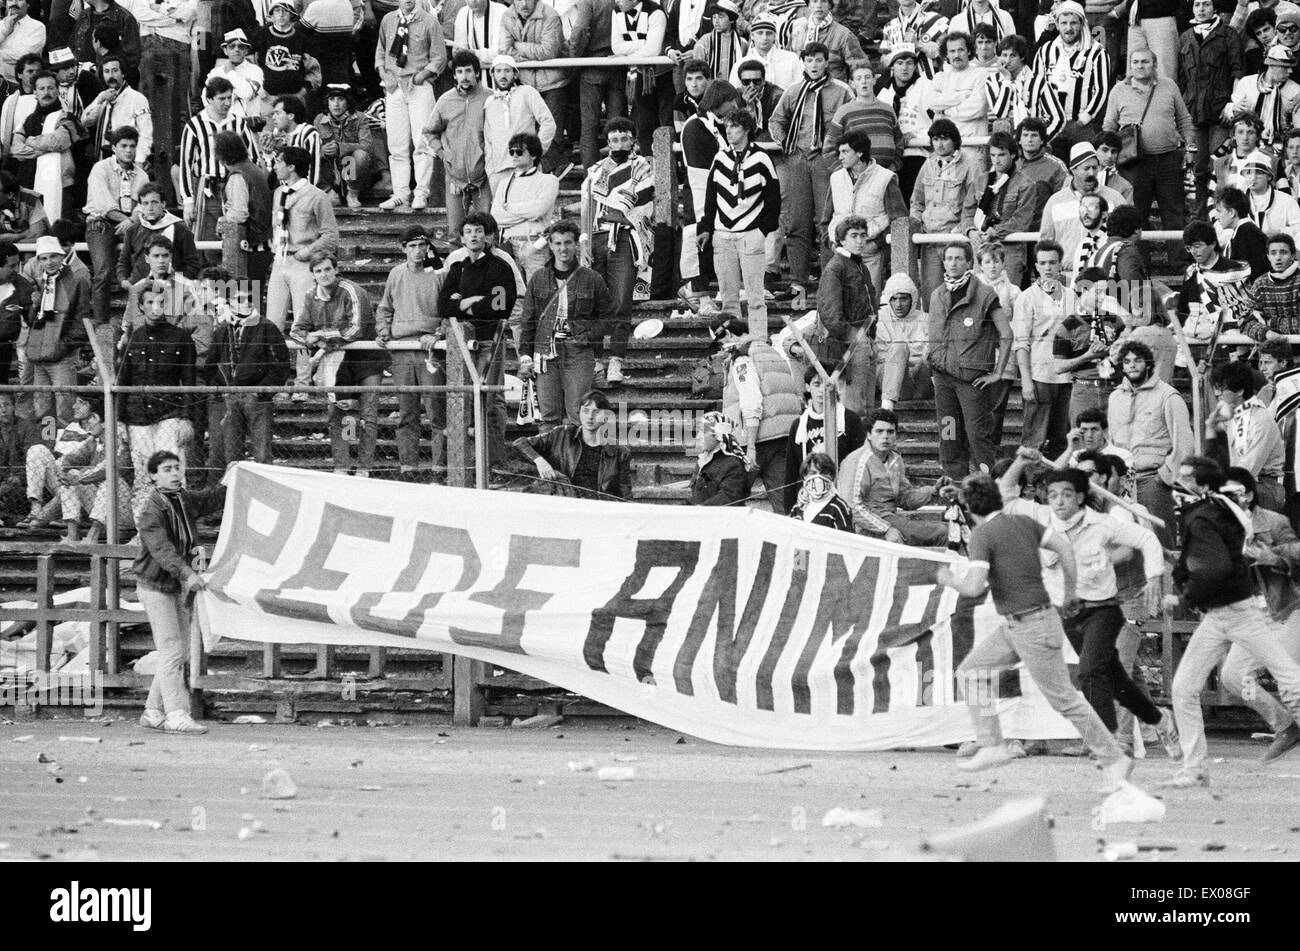 Juventus 1-0 Liverpool, 1985 European Cup Final, Heysel Stadium, Brussels, Wednesday 29th May 1985. Crowd Violence. Reds Animals. Stock Photo